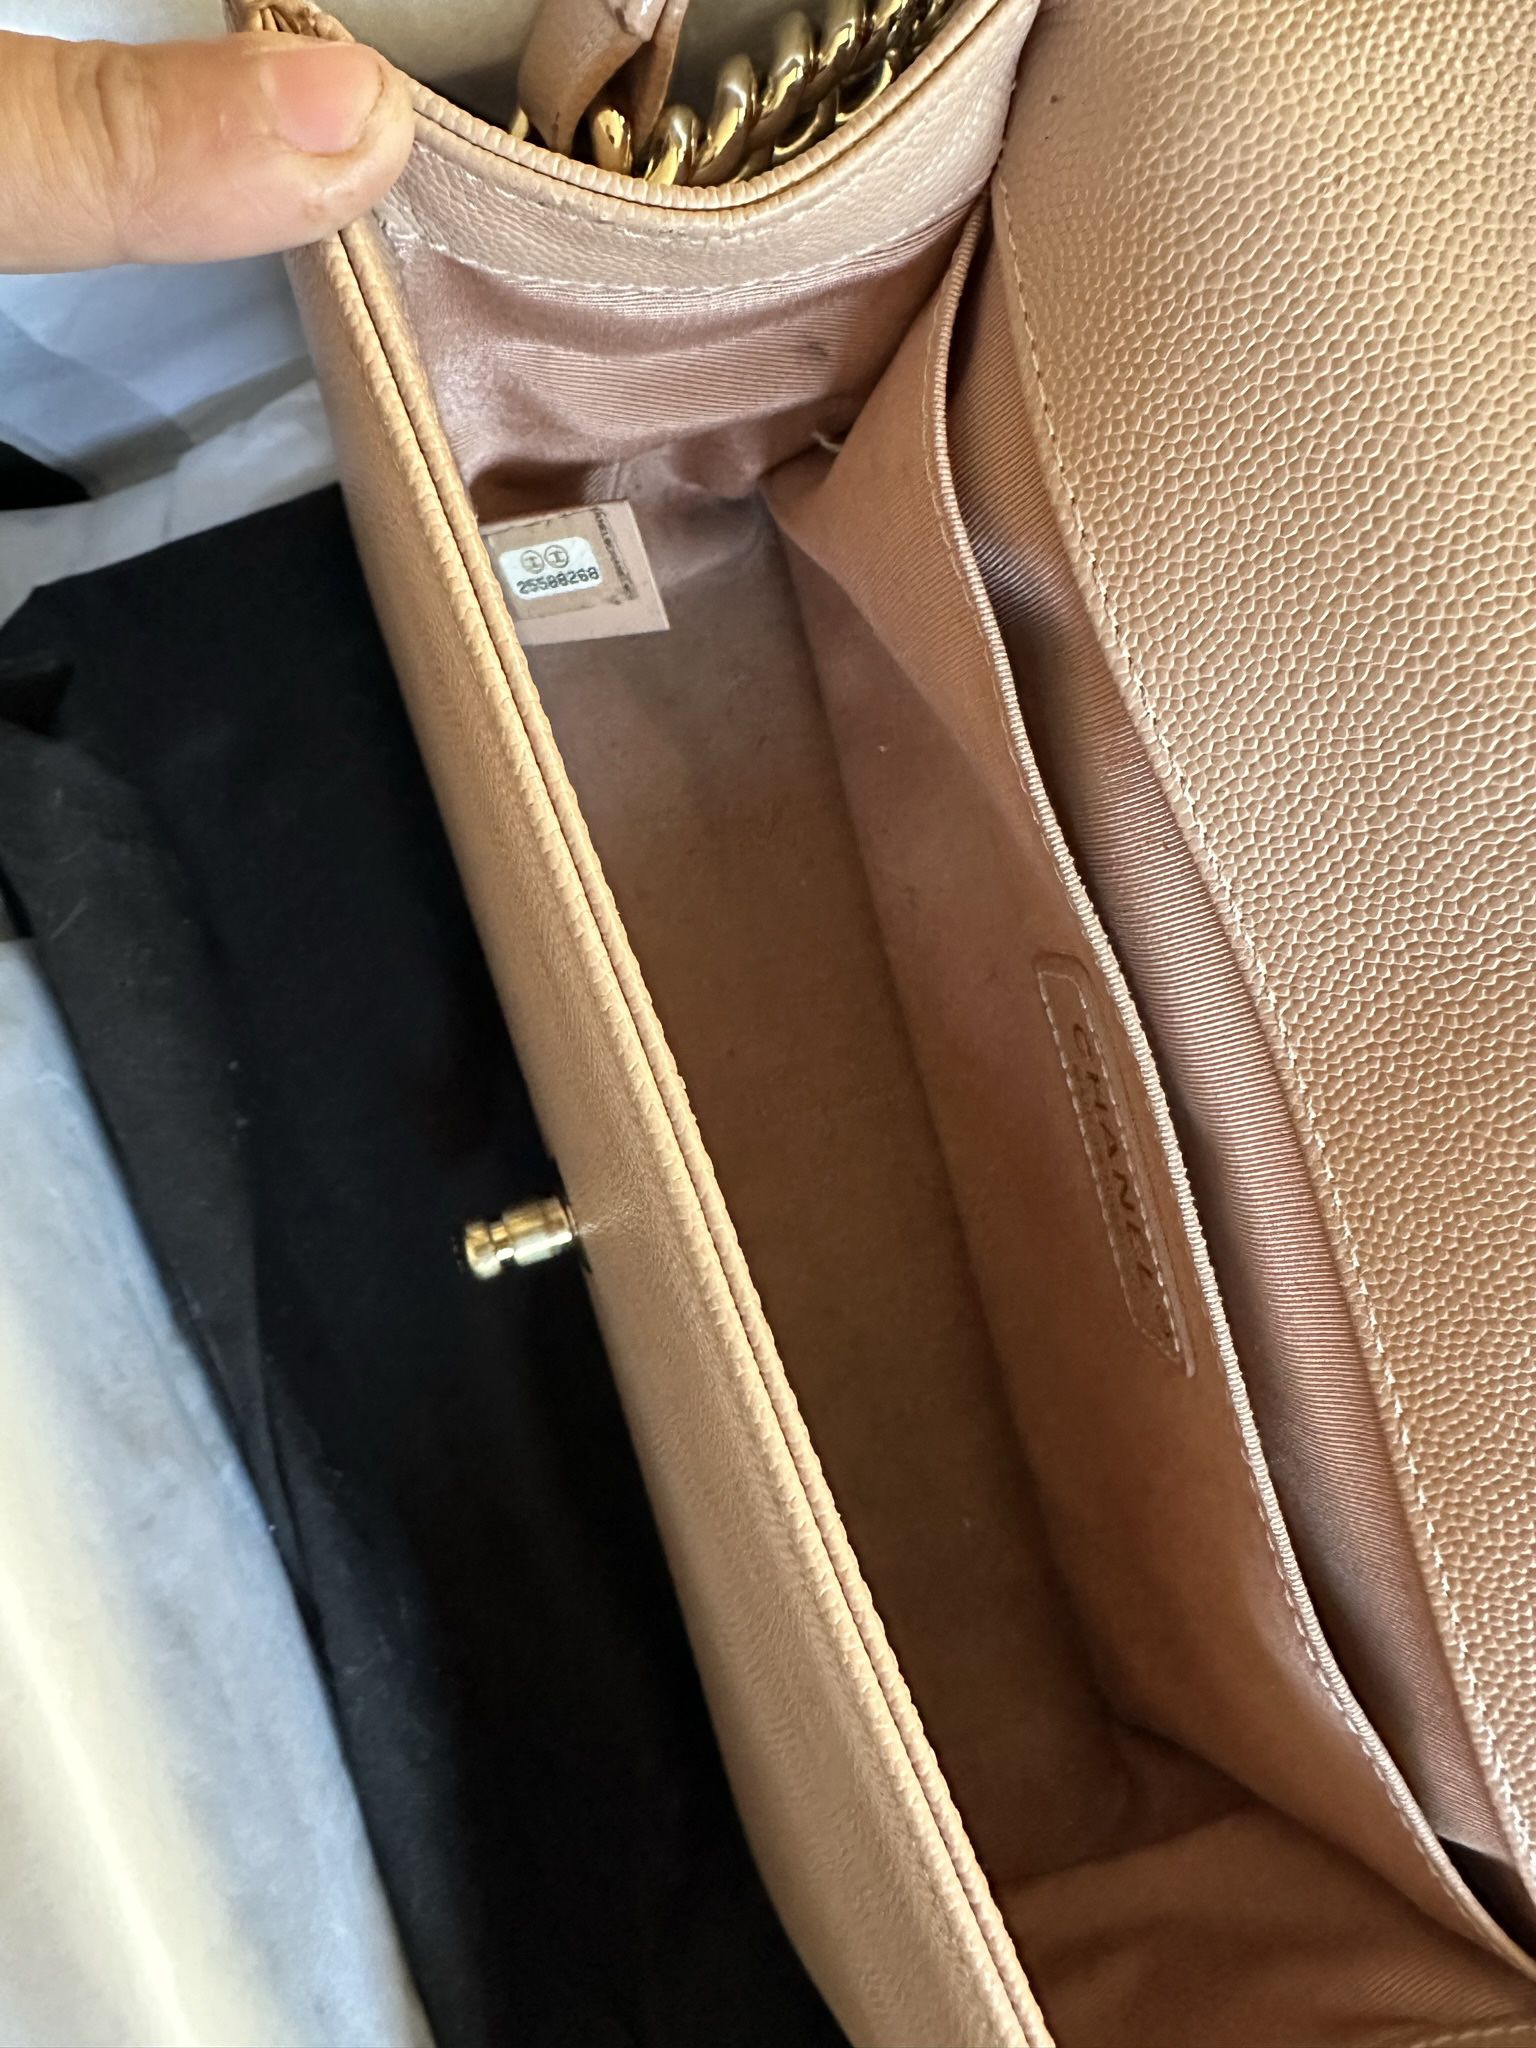 Chanel Flap bag Authentic Veau Graine Beige With Original Chanel packaging  for Sale in Los Angeles, CA - OfferUp